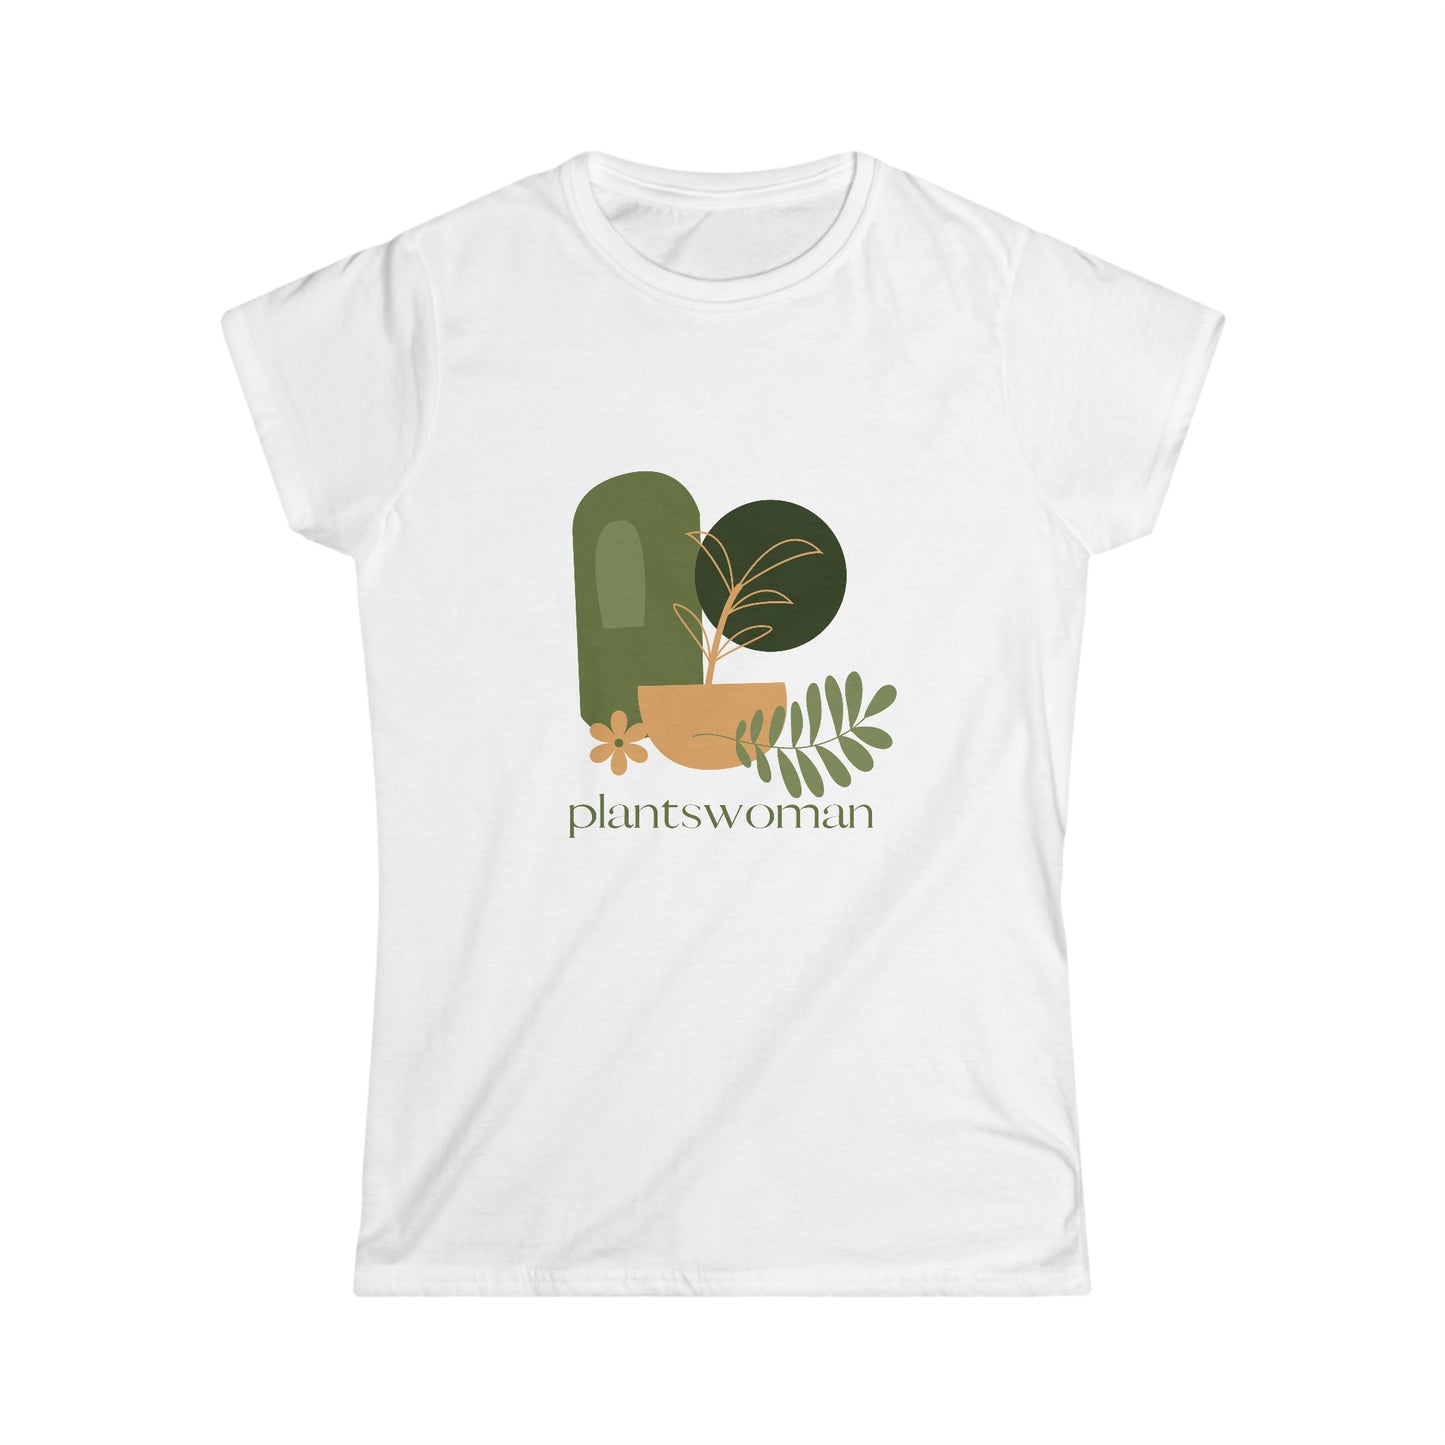 Plantswoman Fun Gardening Fitted T-Shirt for Plant Lovers